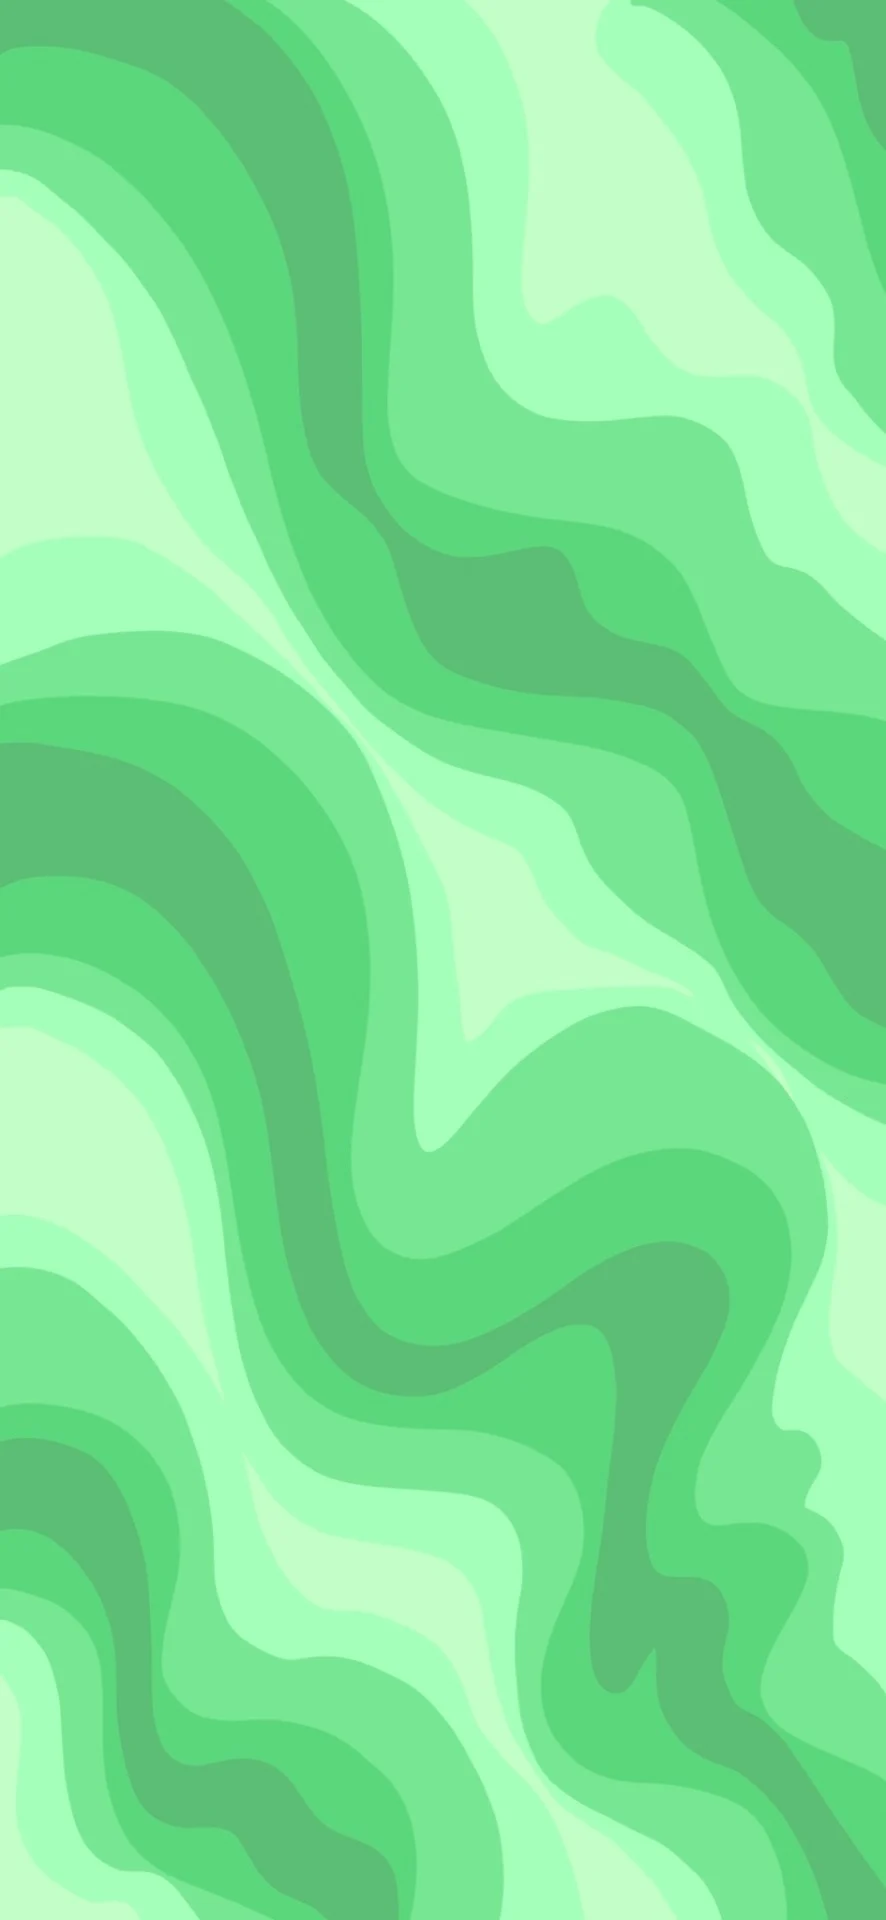 Green wallpaper for your phone - Mint green